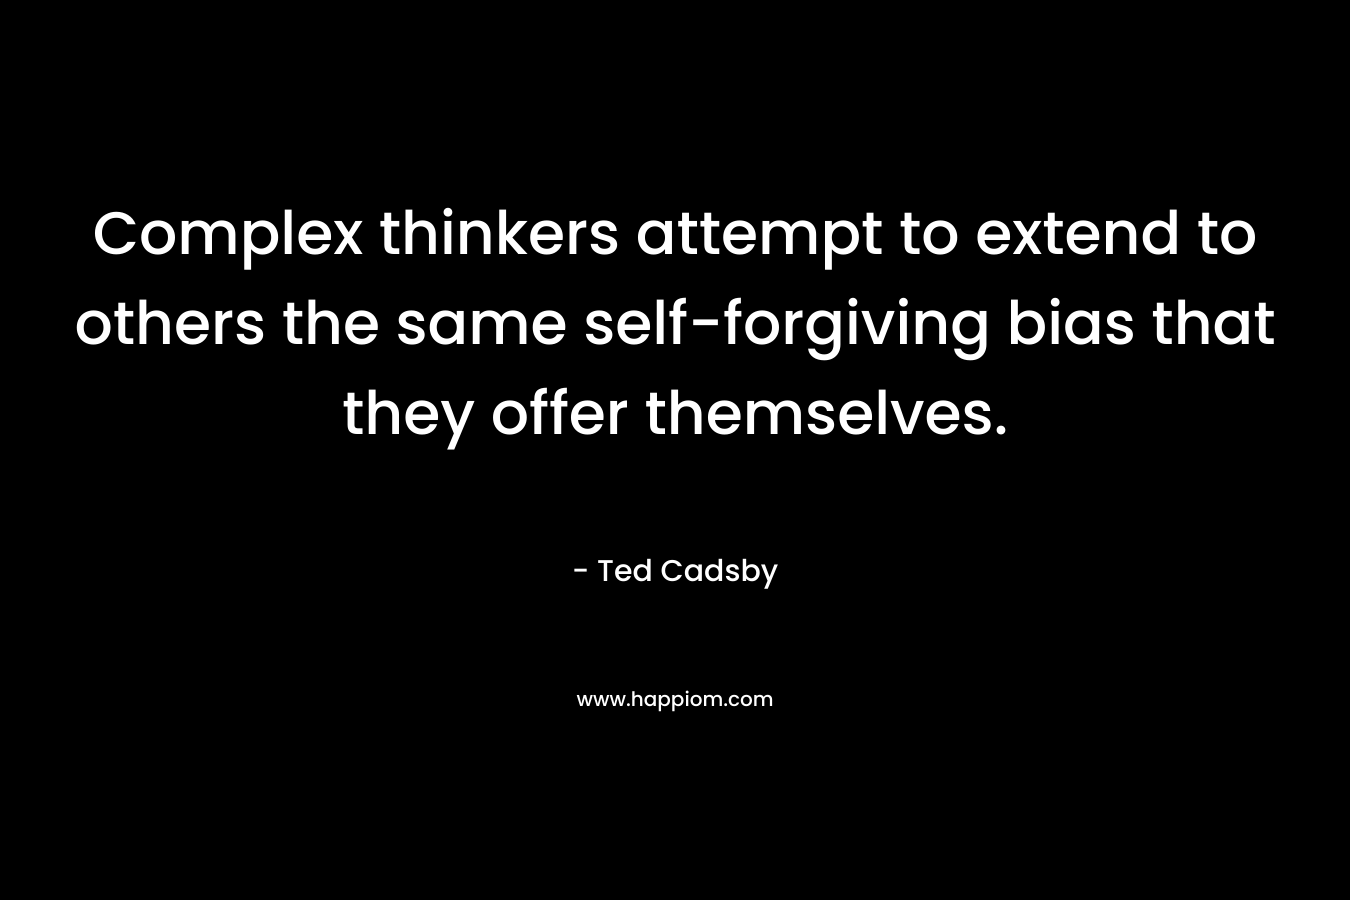 Complex thinkers attempt to extend to others the same self-forgiving bias that they offer themselves. – Ted Cadsby